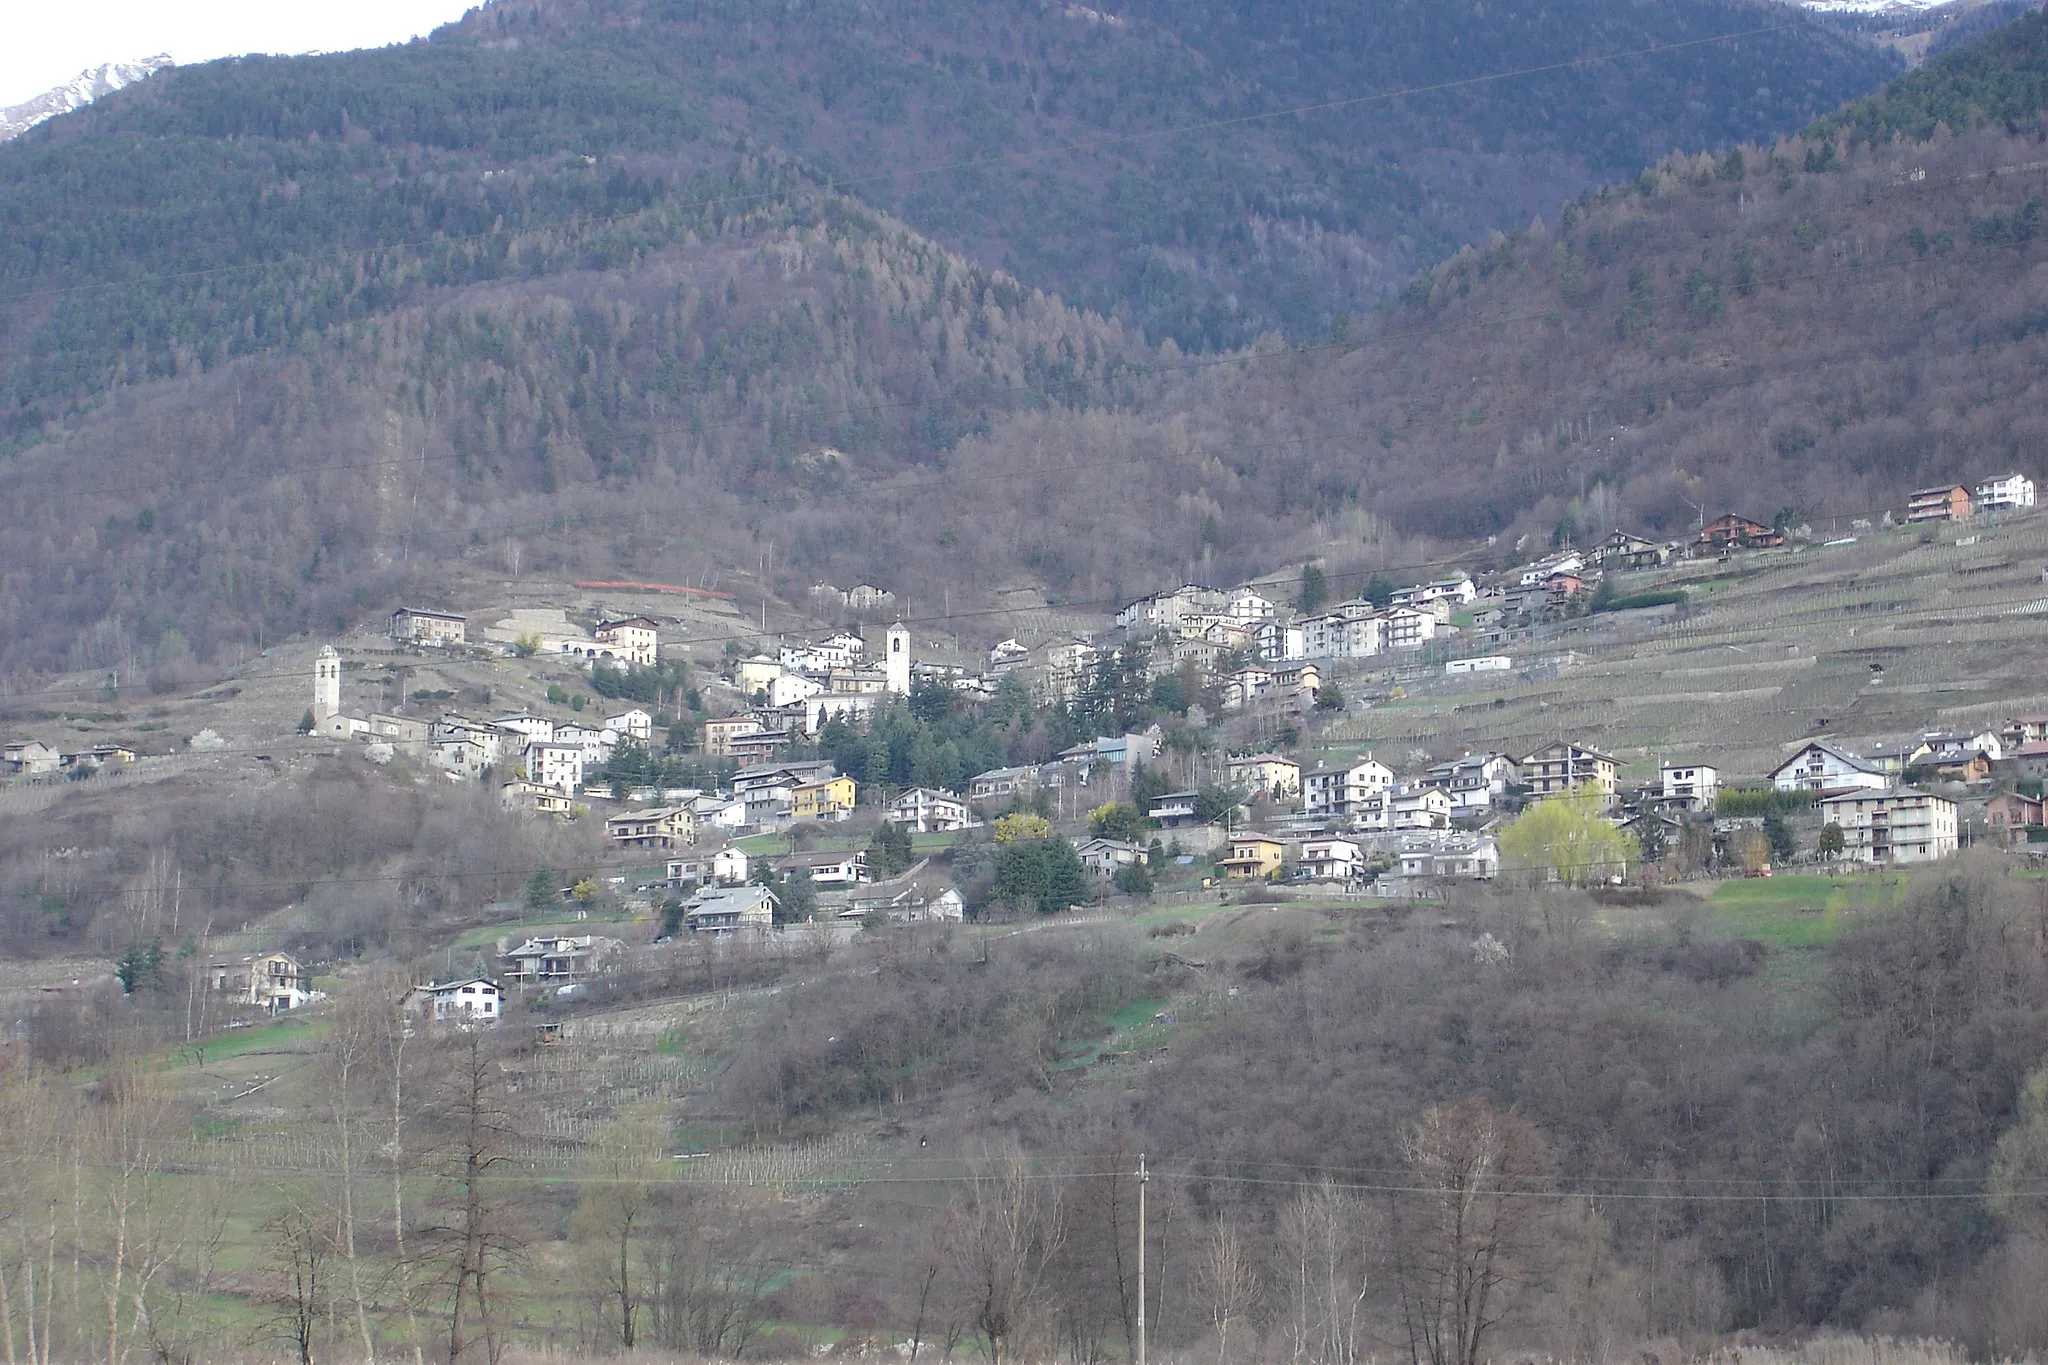 Image of Castione Andevenno